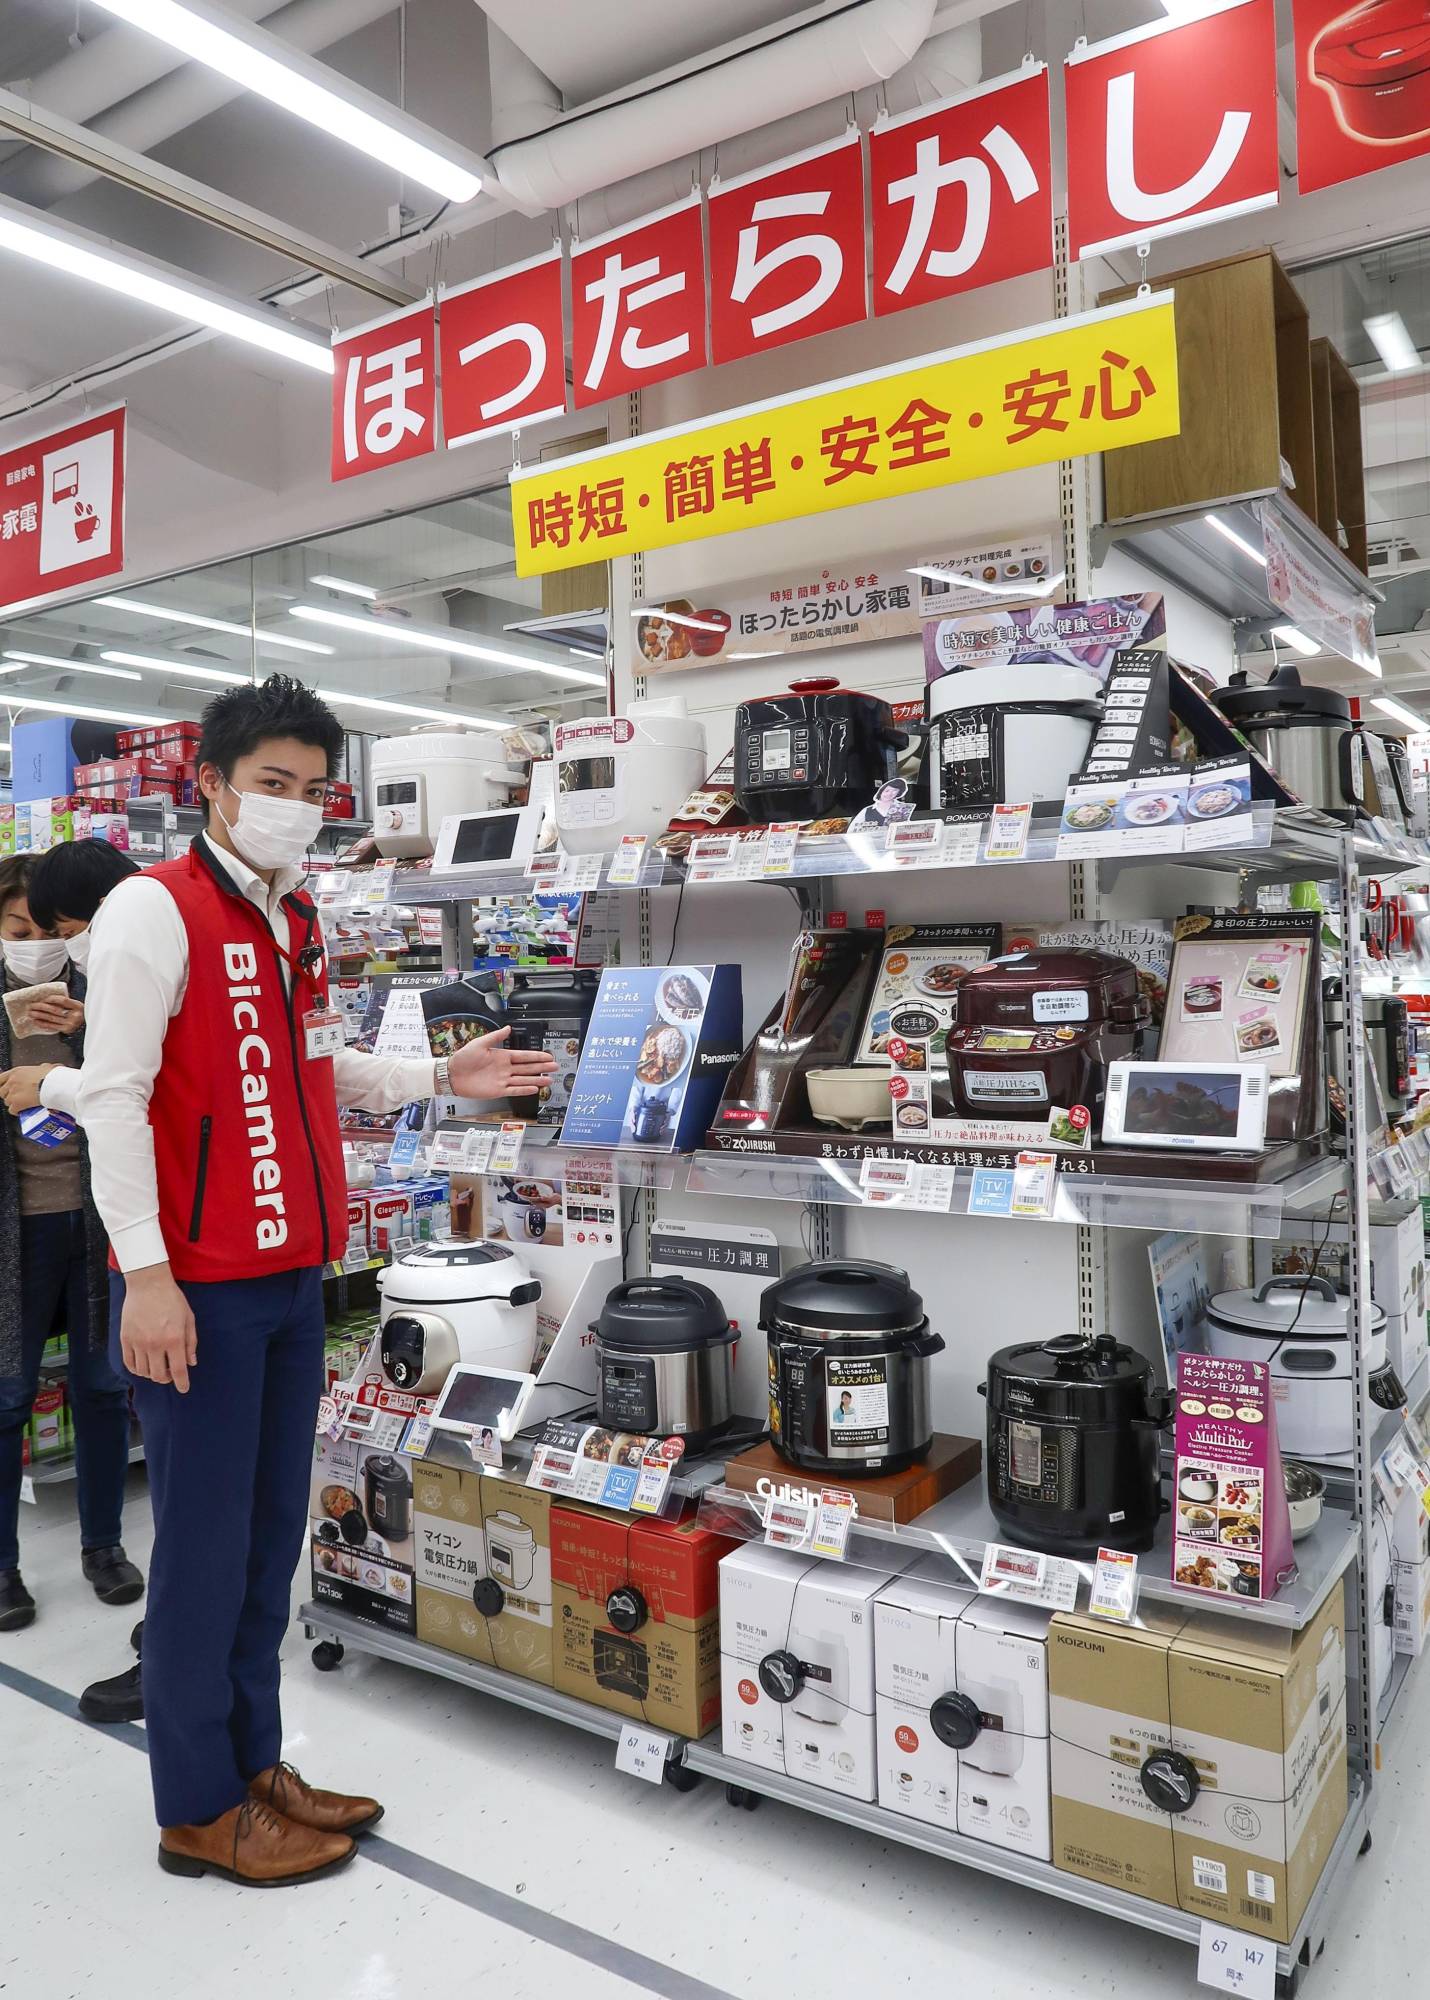 Home appliance shipments hit 24-year high amid pandemic in Japan - The Japan  Times